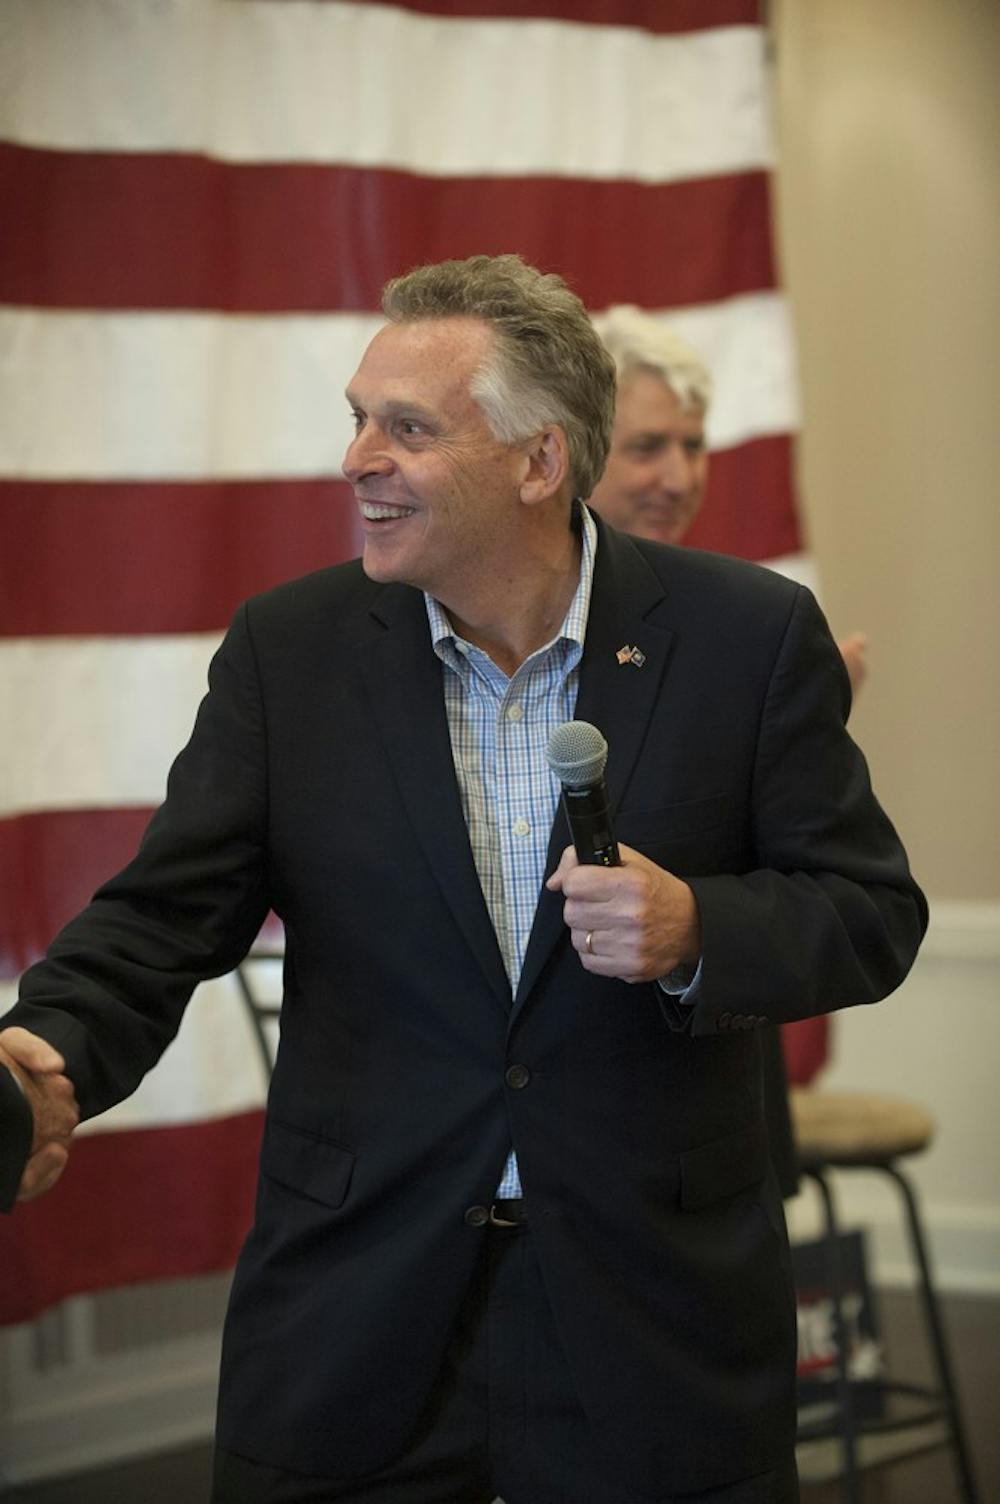 <p>Governor McAuliffe passed Executive Order 40 on Wednesday to address the "need for more extensive training and oversight" in the Virginia Alcoholic Beverage Control. </p>